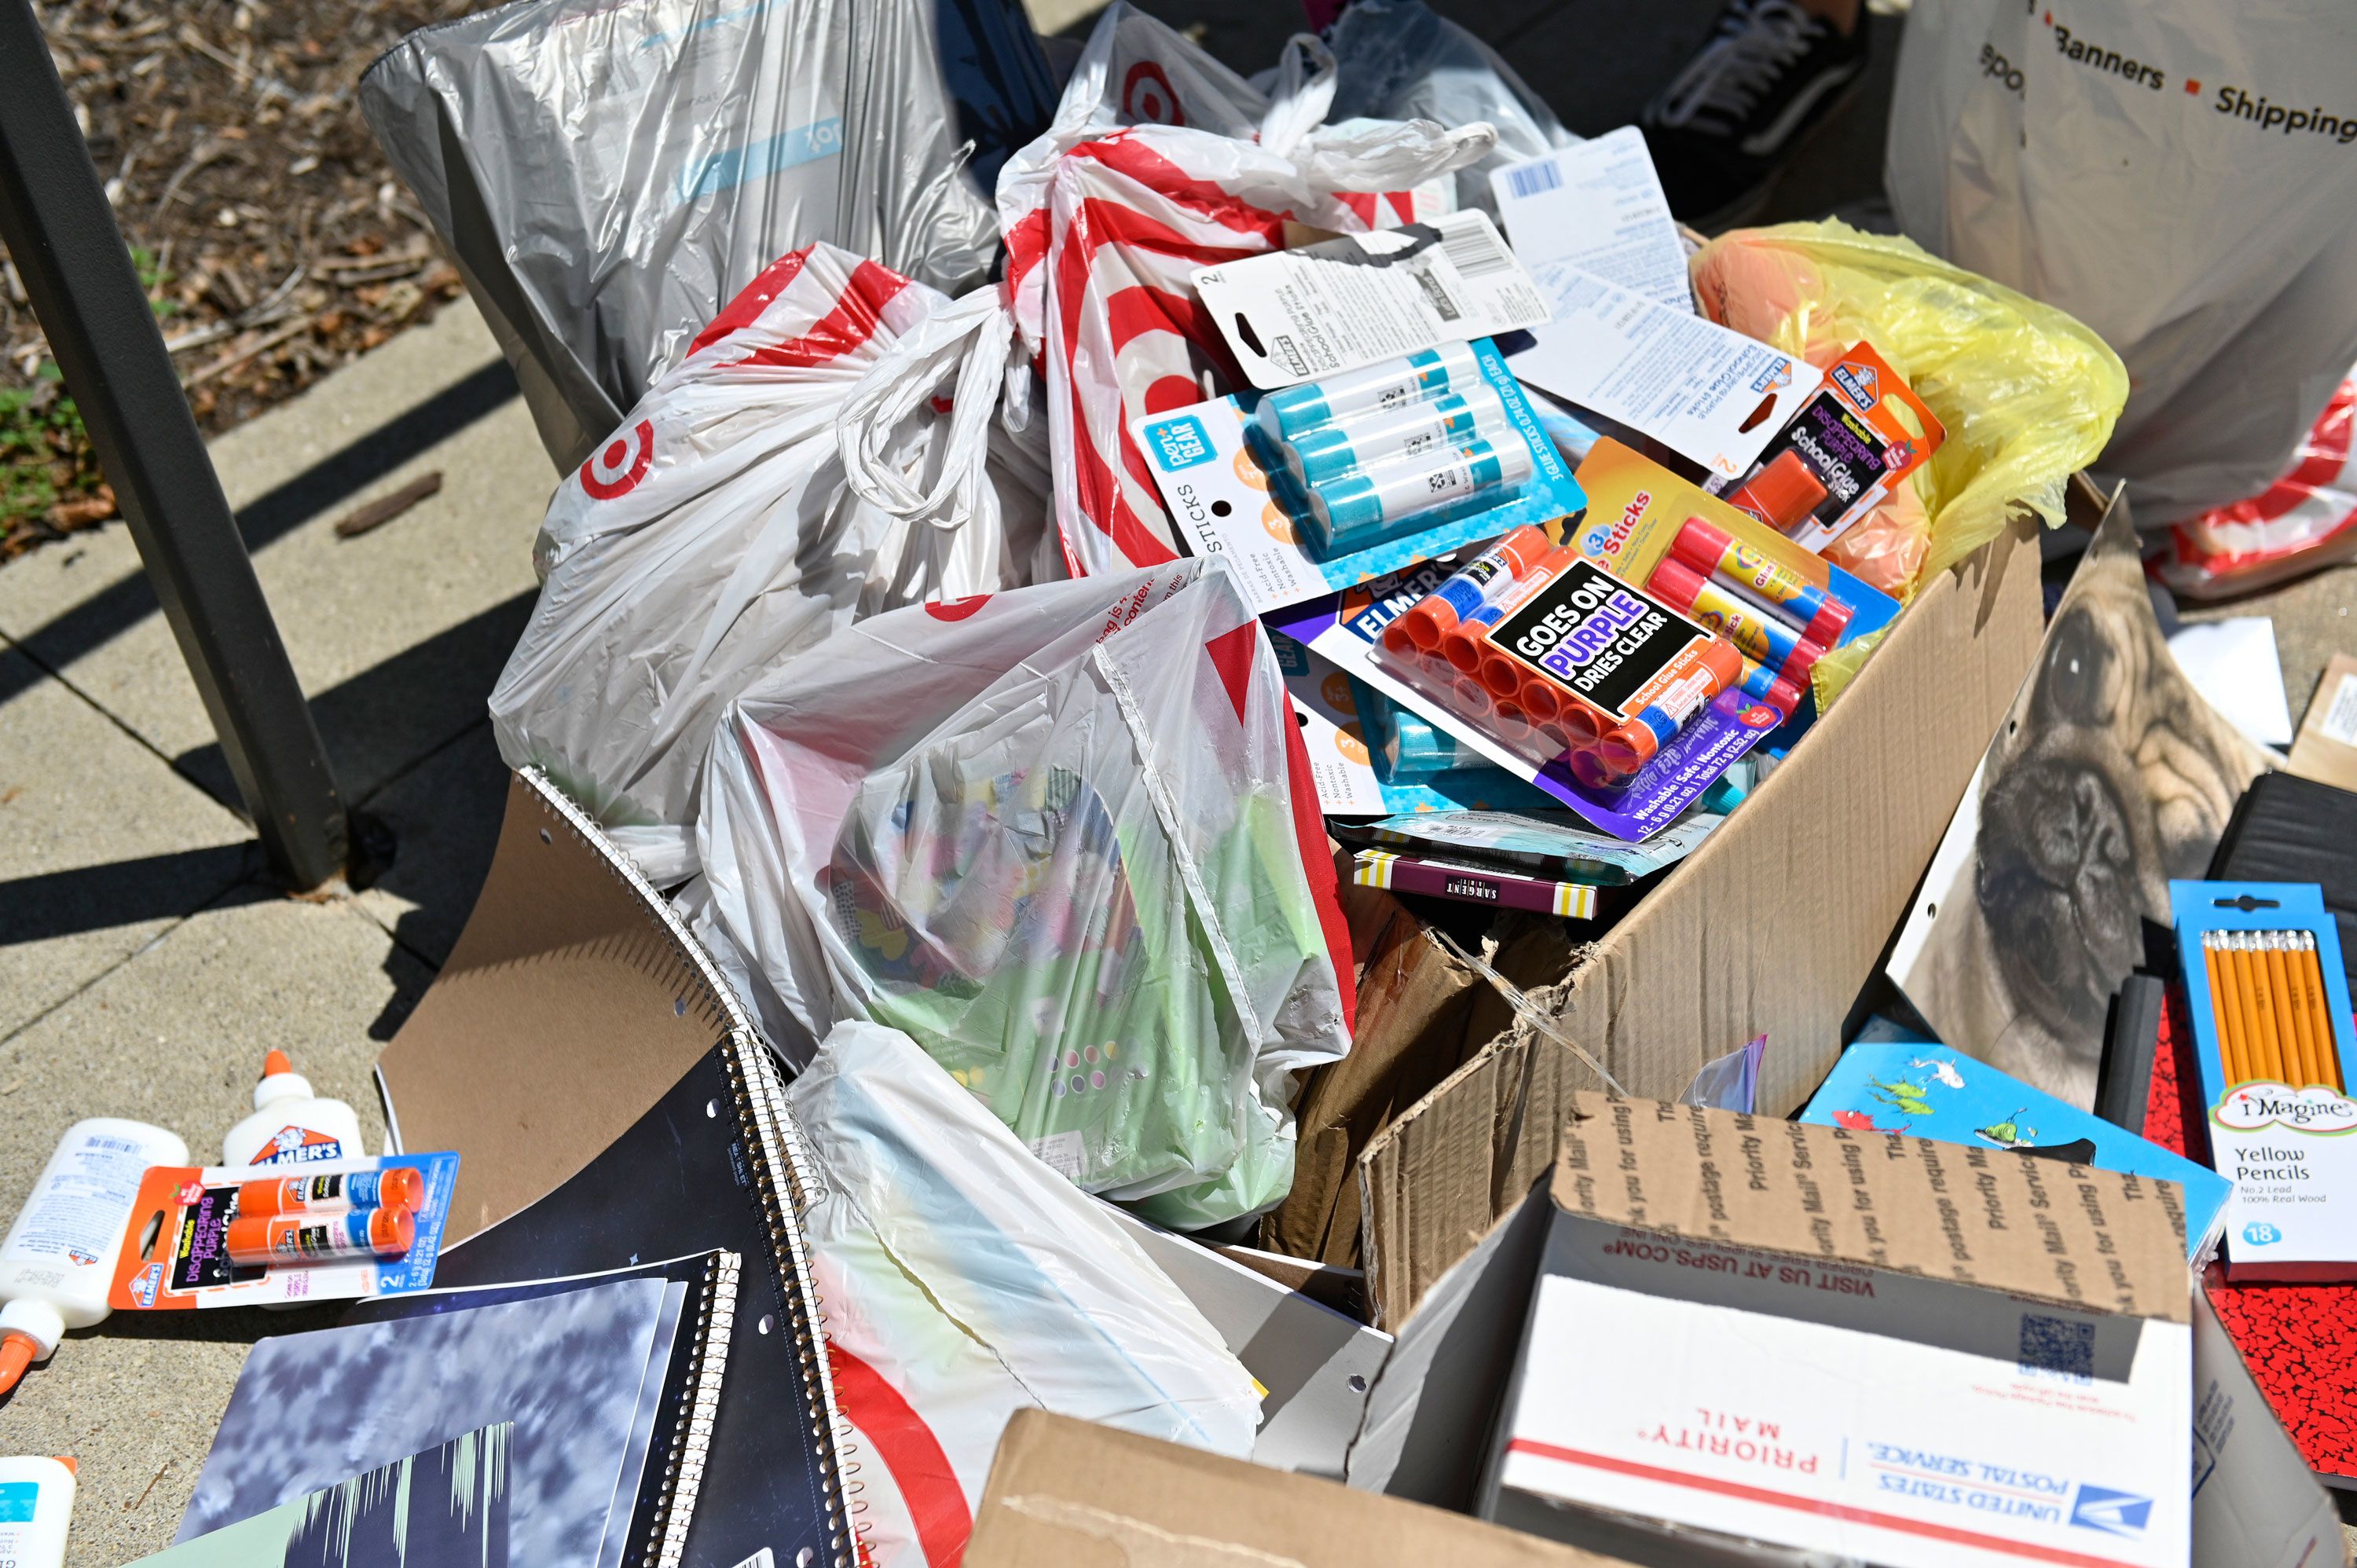 This Teacher Has Spent $2,000 on Classroom Supplies This Year